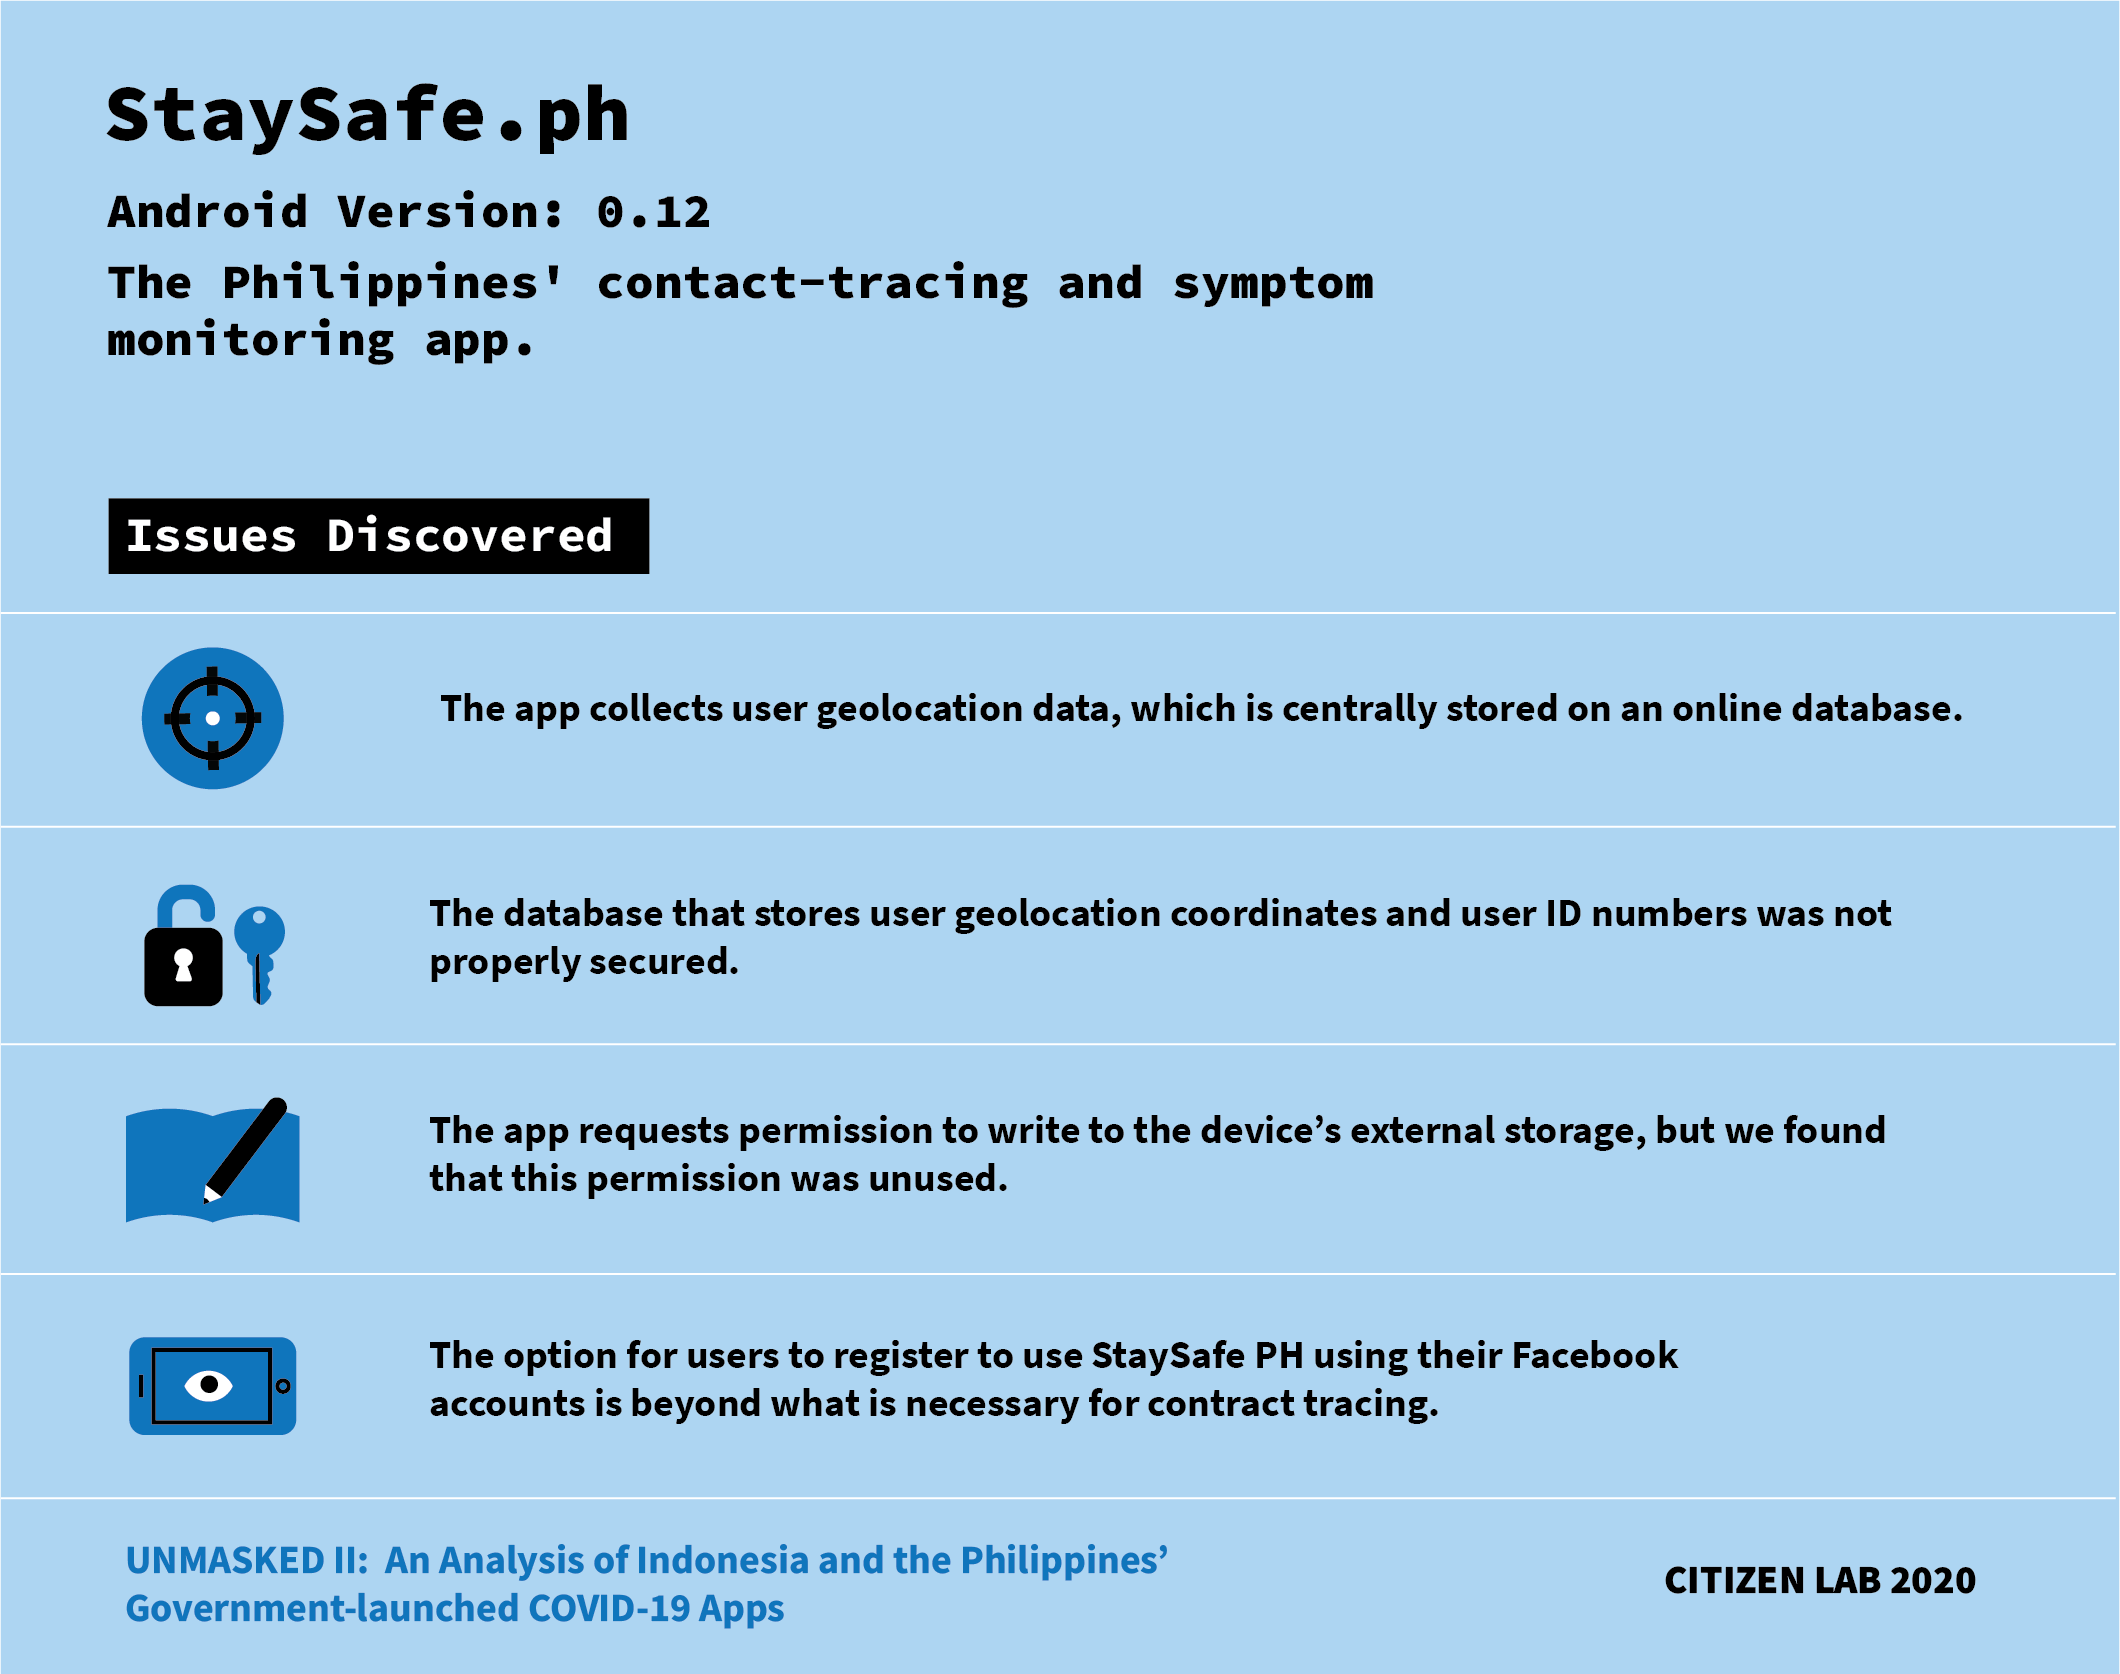 List of issues discovered on the COVID-19 app StaySafe.Ph